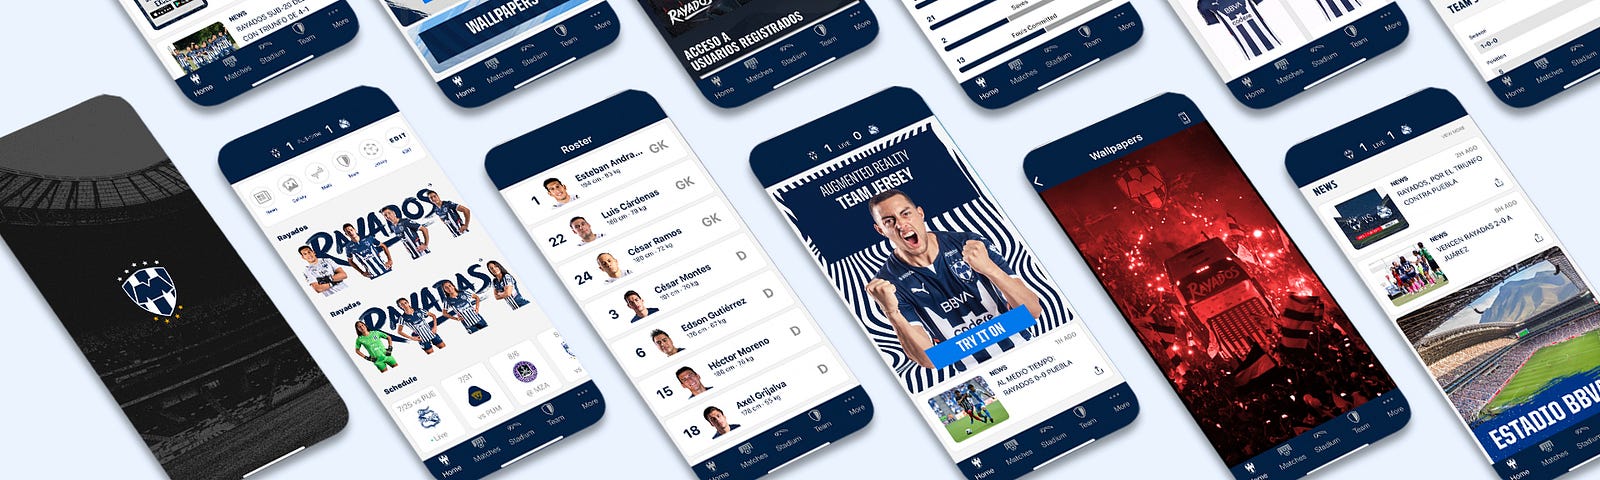 The official Rayados club app, developed by YinzCam.